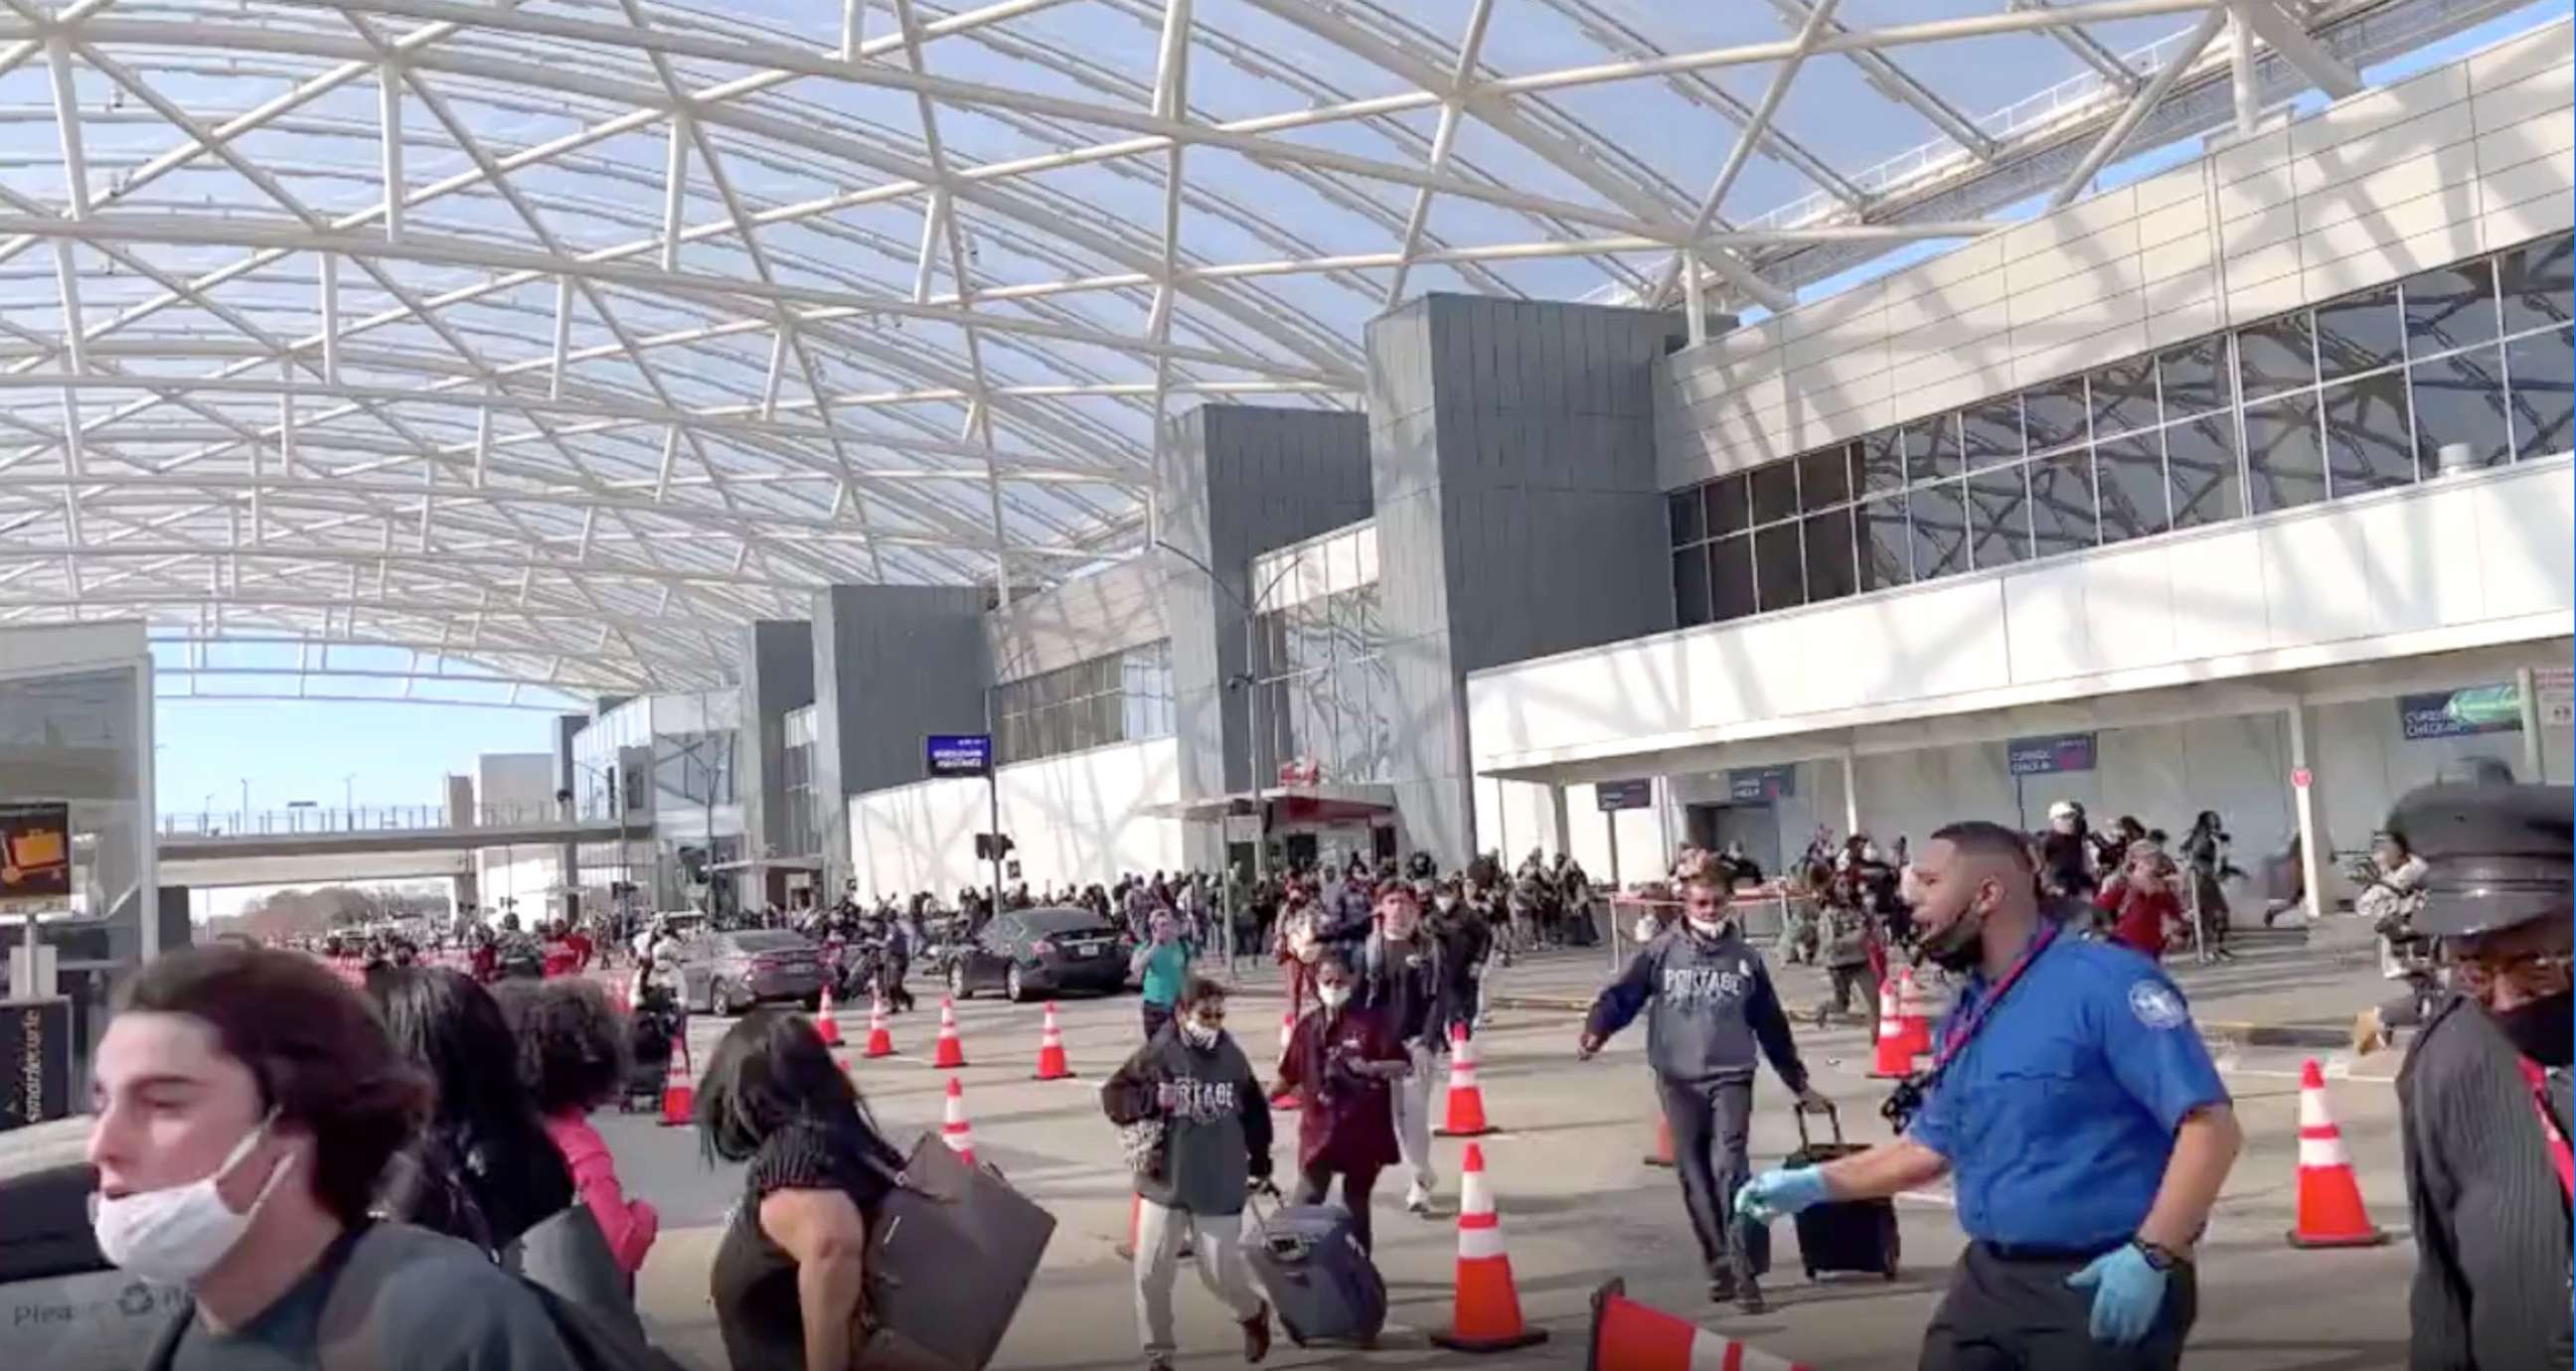 PHOTO: A still from a social media video taken outside the terminal shows the scene after a gun was accidentally discharged inside Hartsfield-Jackson Atlanta International Airport in Atlanta on Nov. 20, 2021.